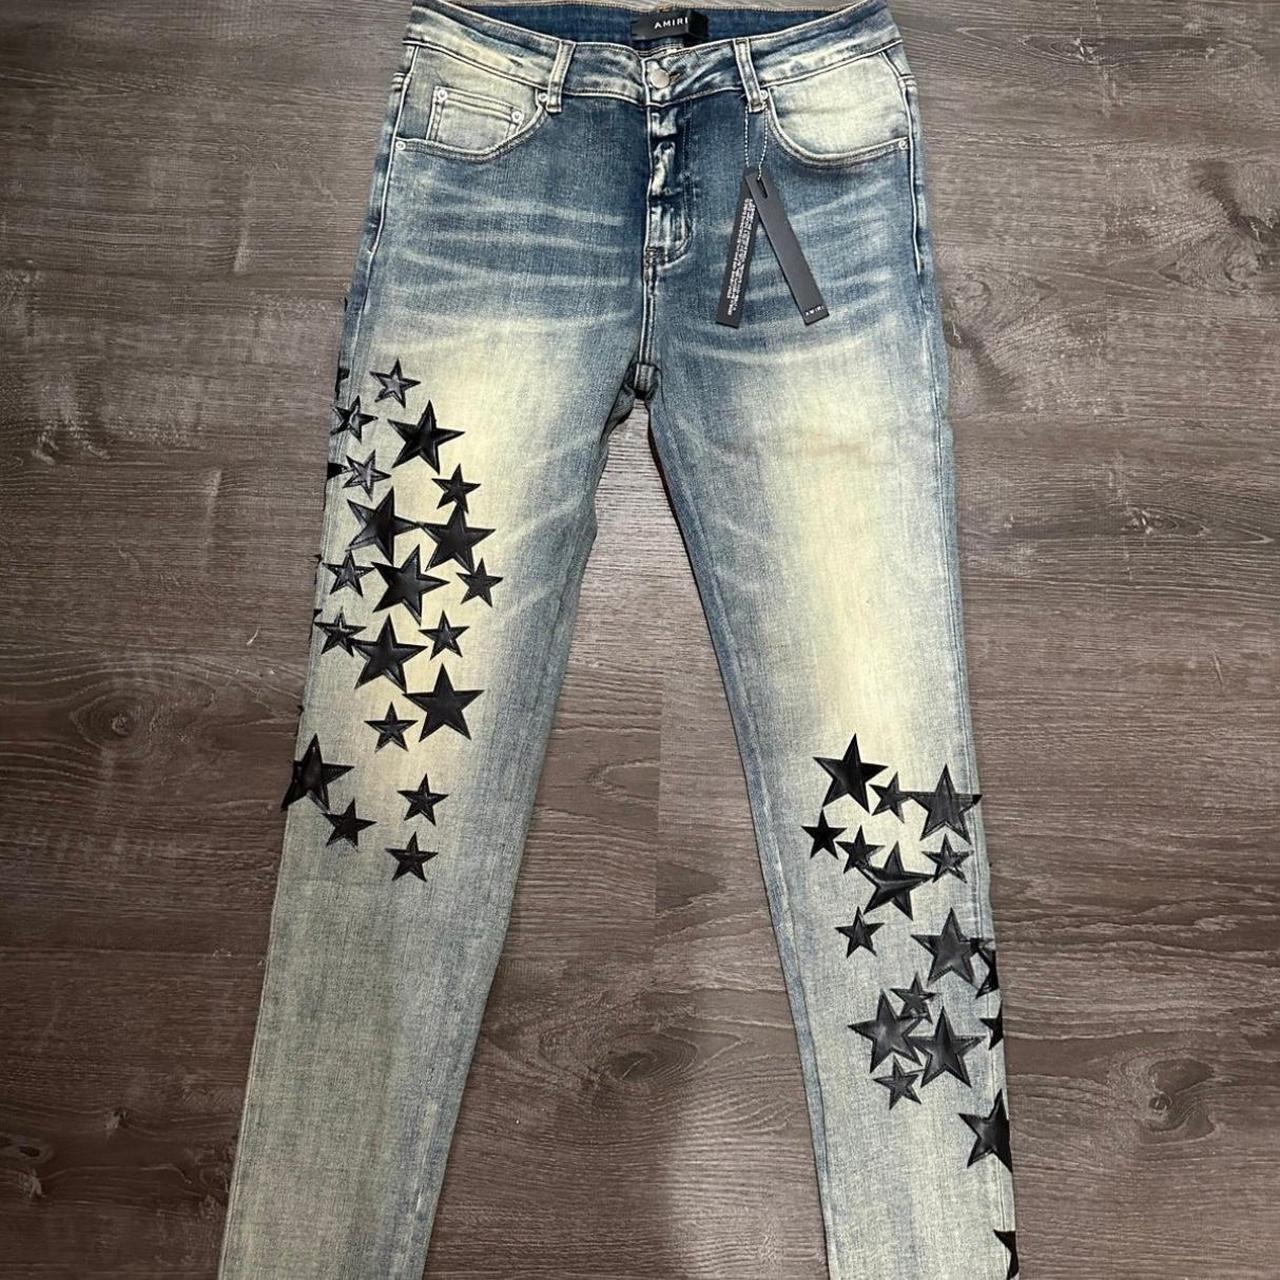 amiri leather star jeans - authentic - next day... - Depop